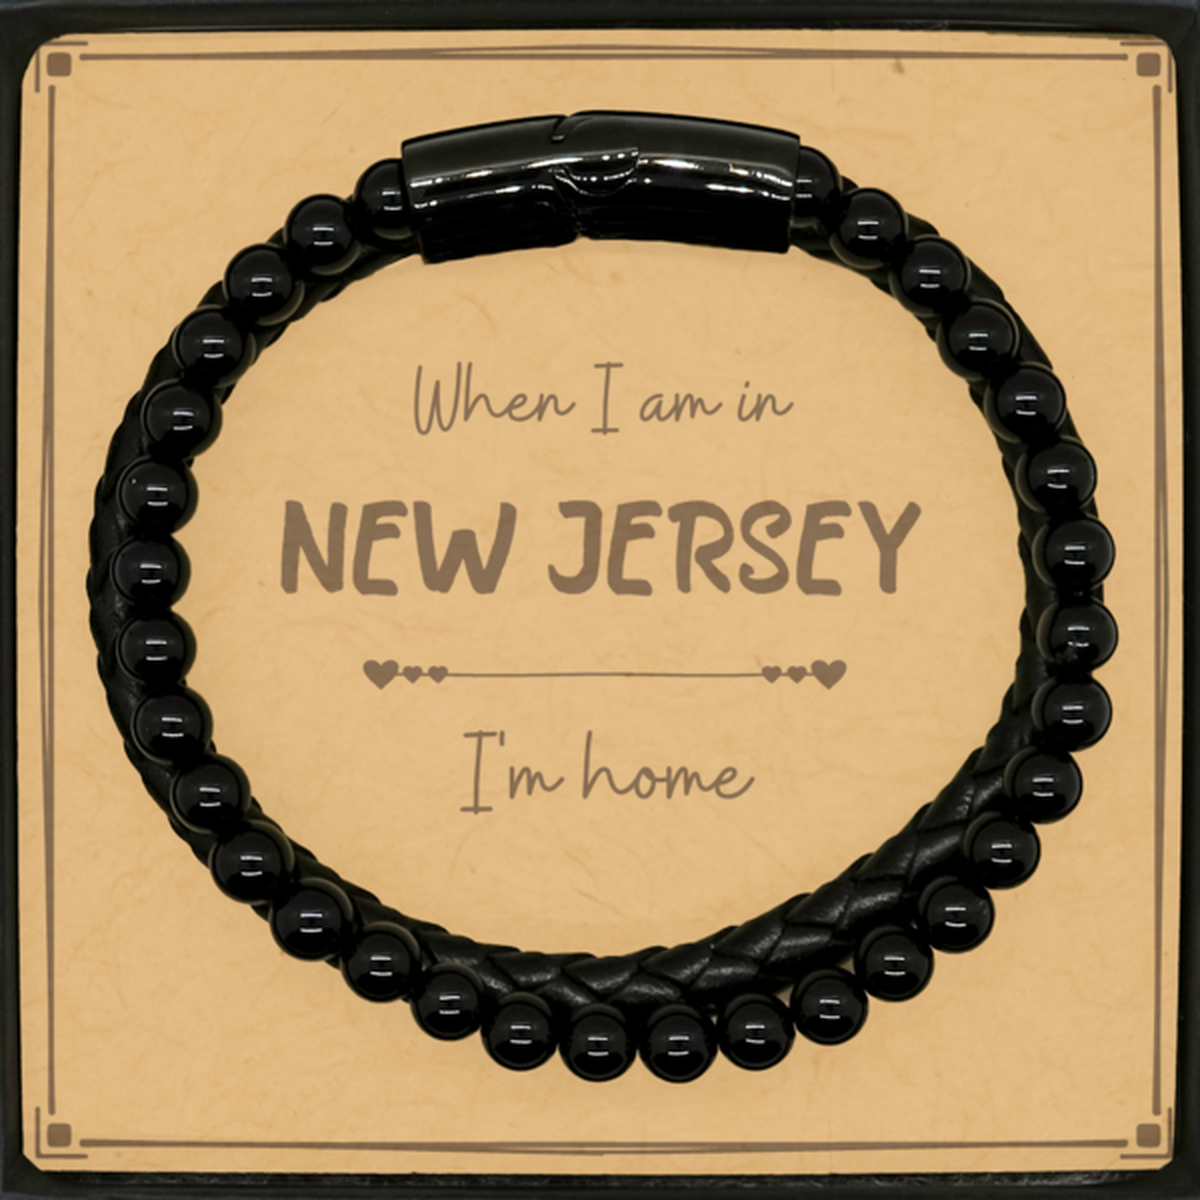 When I am in New Jersey I'm home Stone Leather Bracelets, Message Card Gifts For New Jersey, State New Jersey Birthday Gifts for Friends Coworker